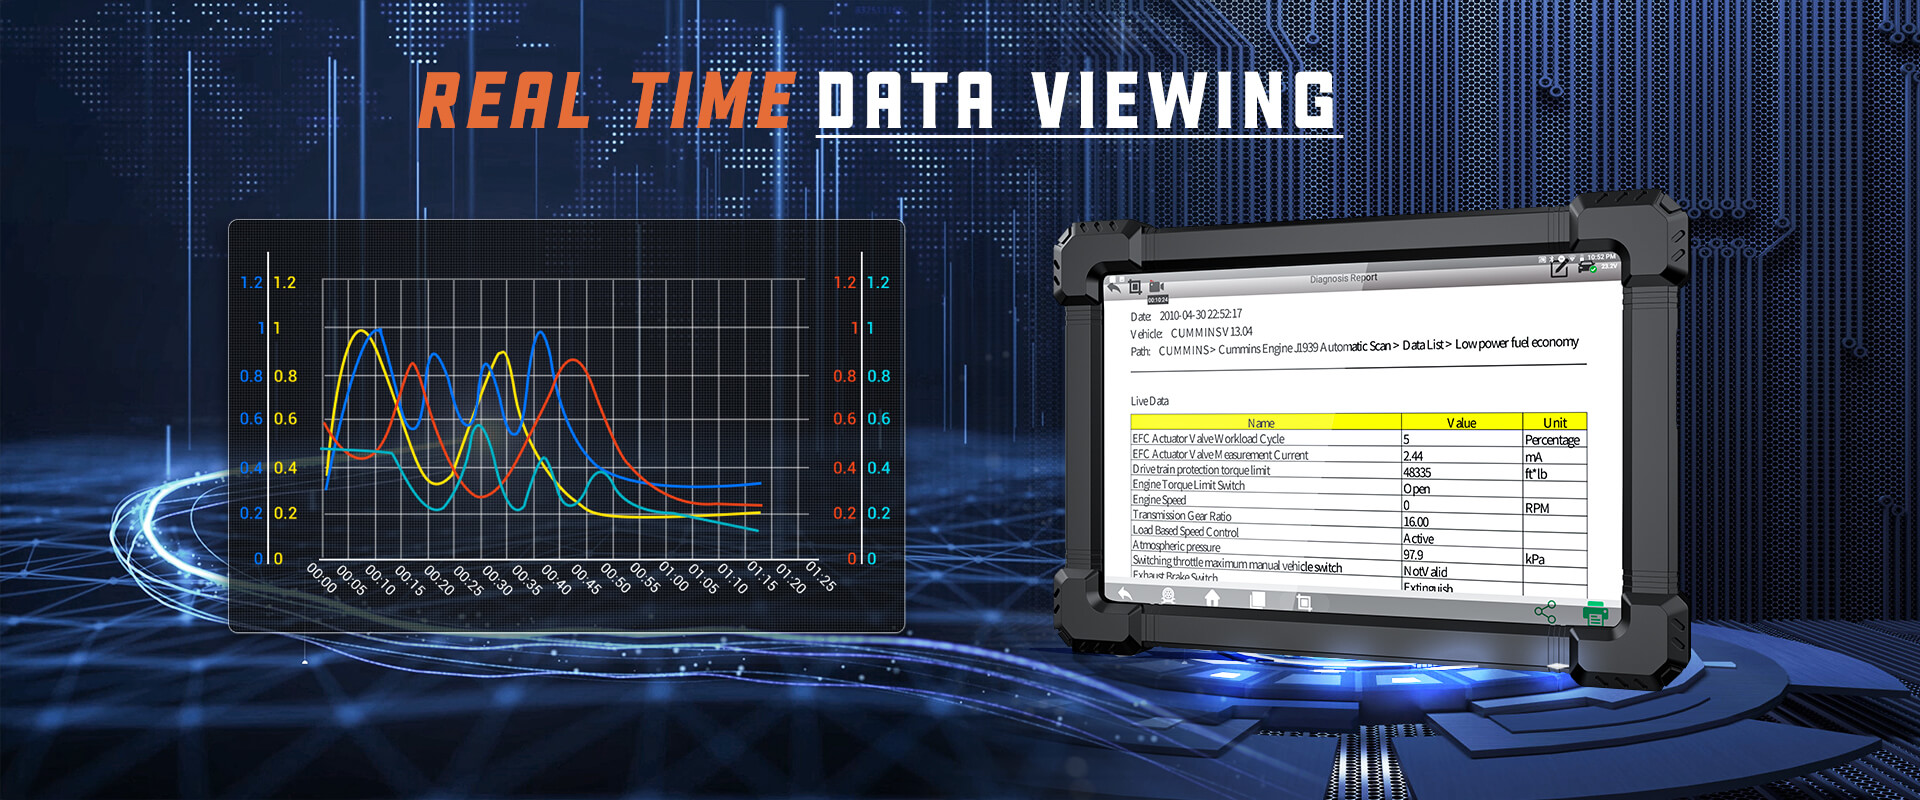 Real-time Data Viewing